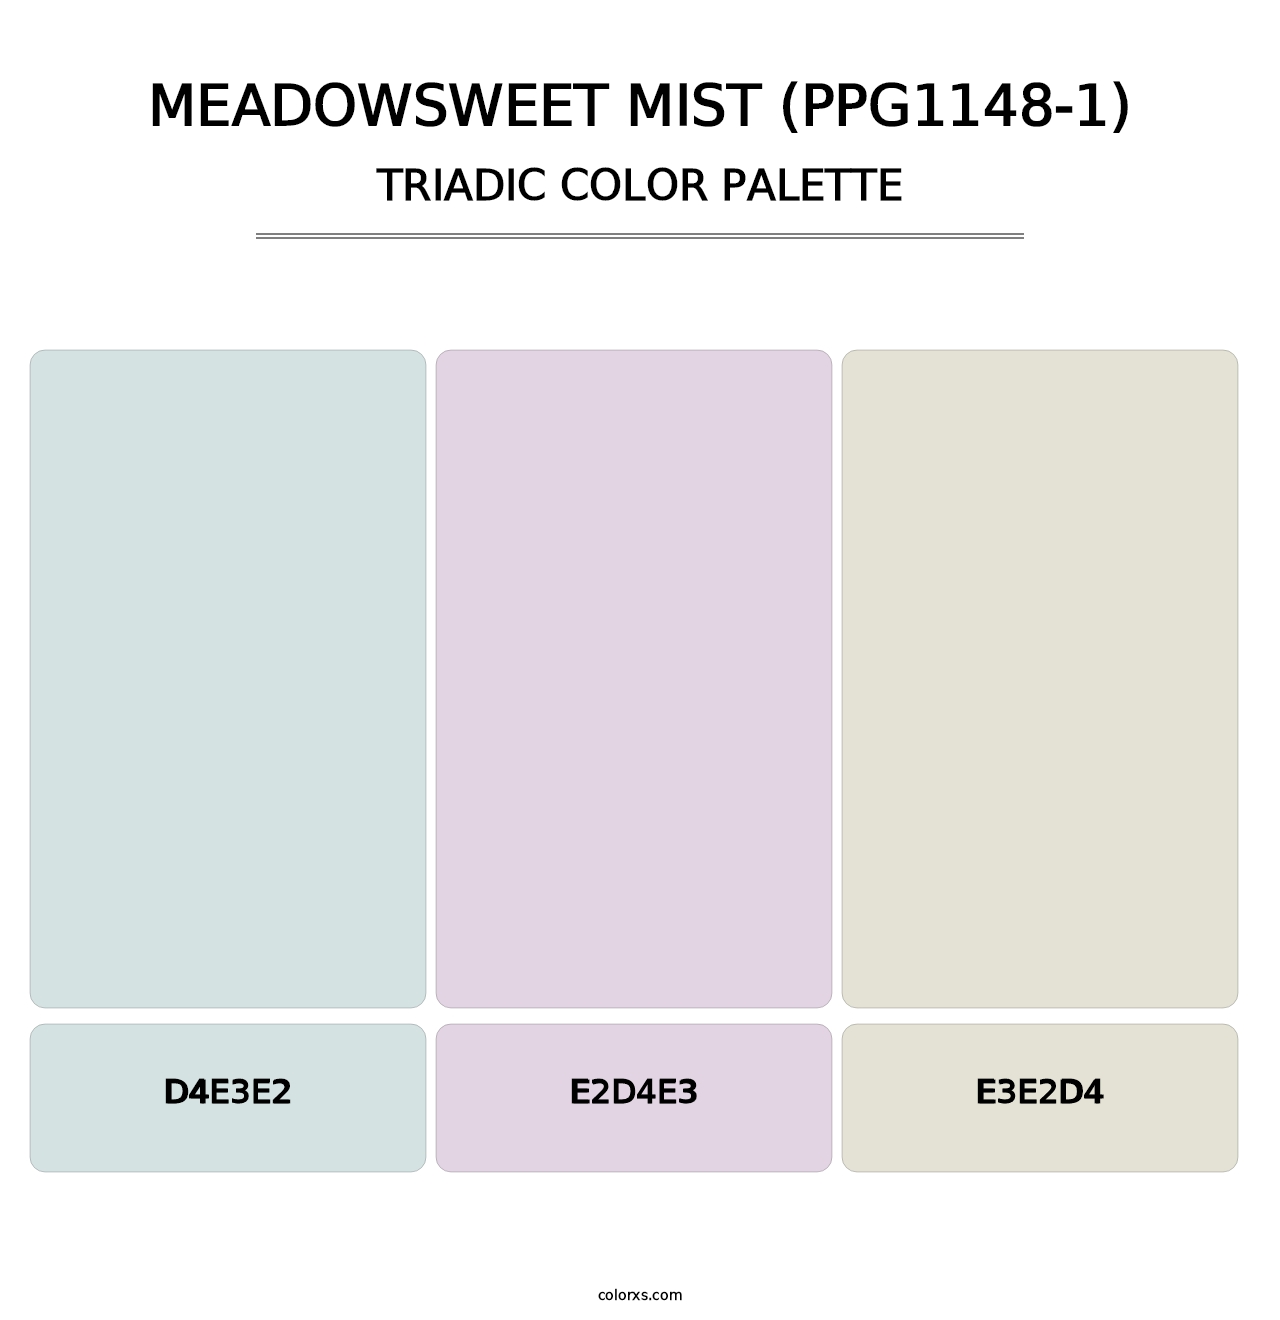 Meadowsweet Mist (PPG1148-1) - Triadic Color Palette